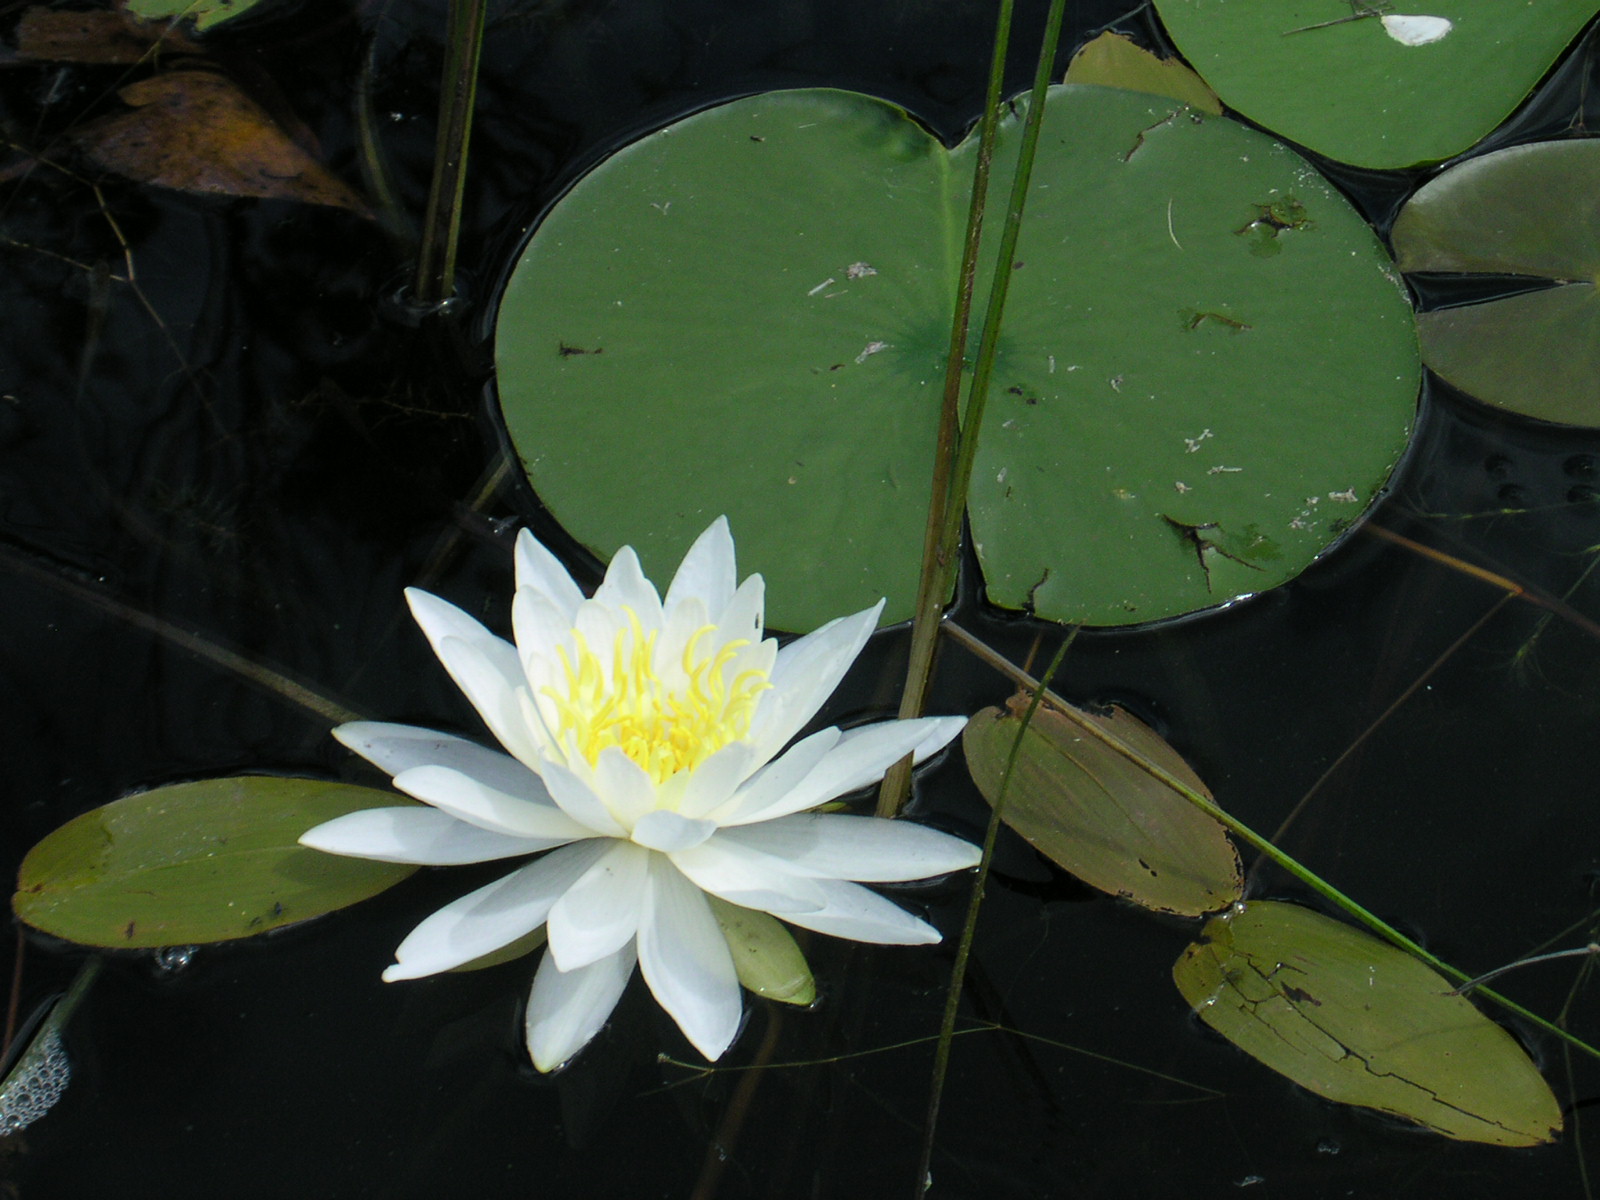 a white water lily with yellow center blooming from the center